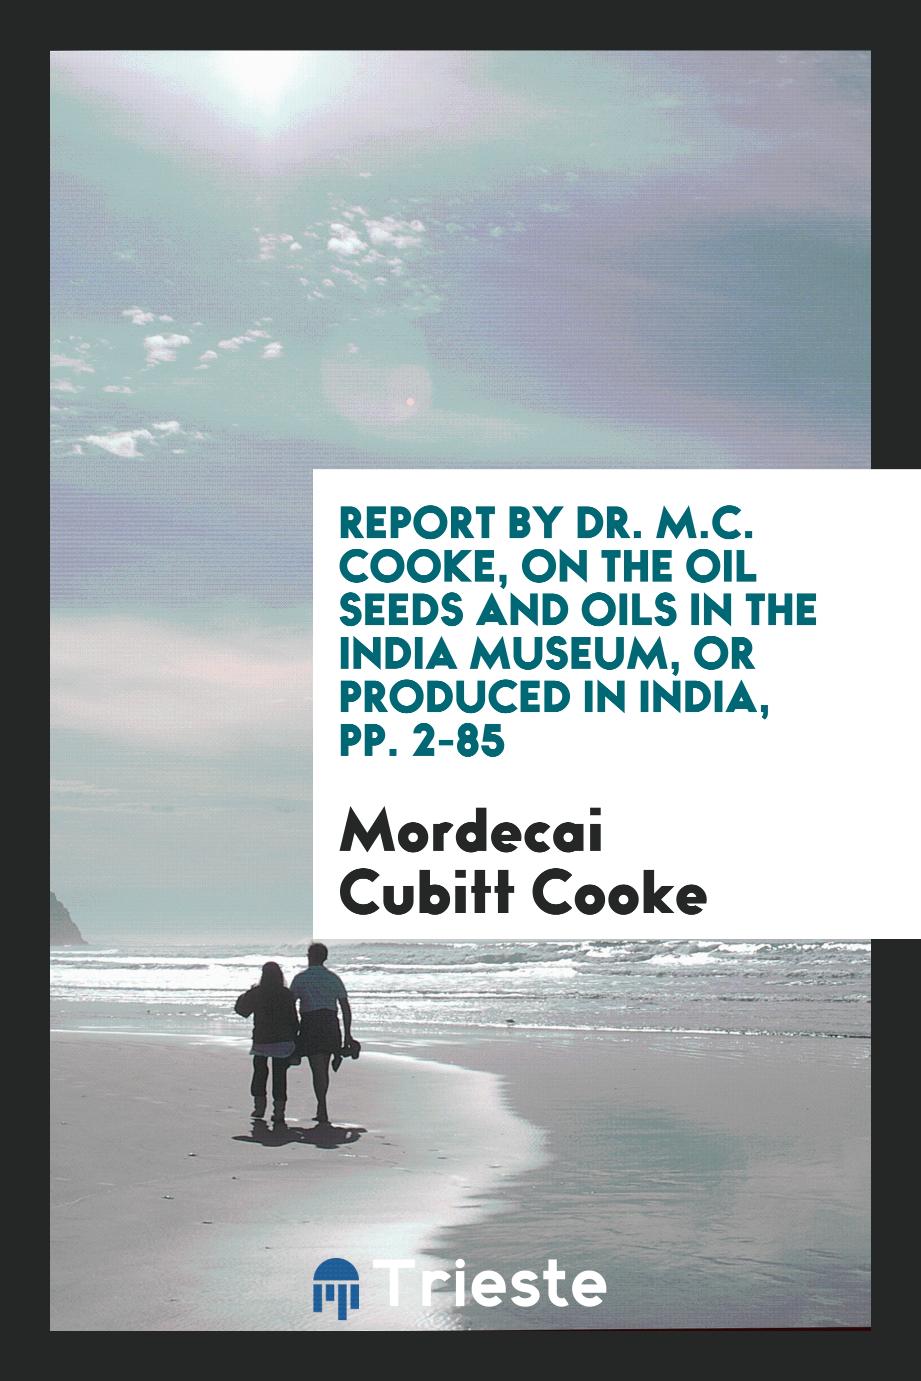 Report by Dr. M.C. Cooke, on the Oil Seeds and Oils in the India Museum, Or produced in India, pp. 2-85